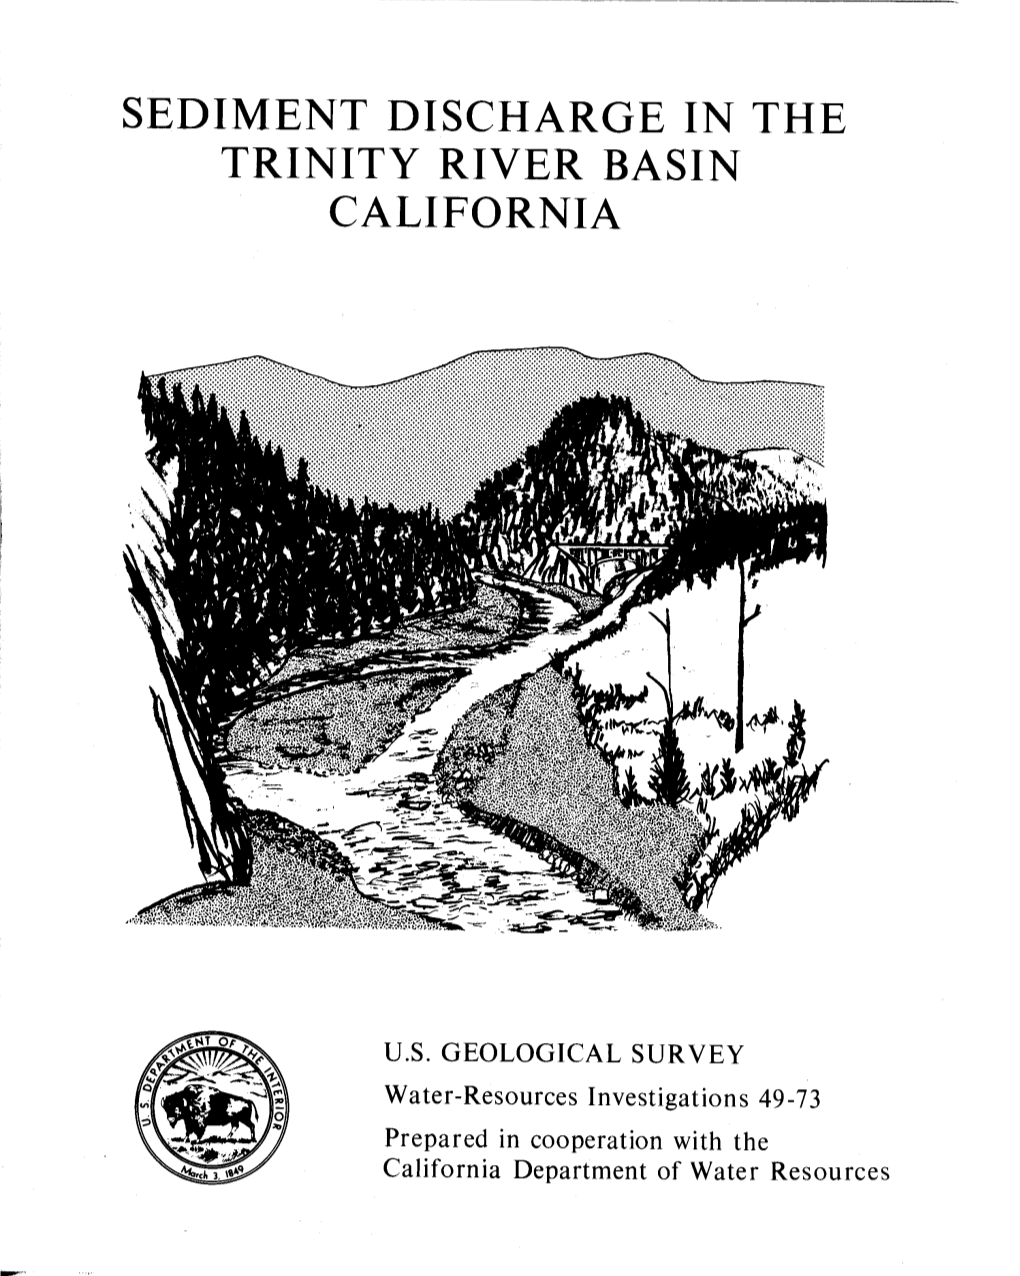 Sediment Discharge in the Trinity River Basin California